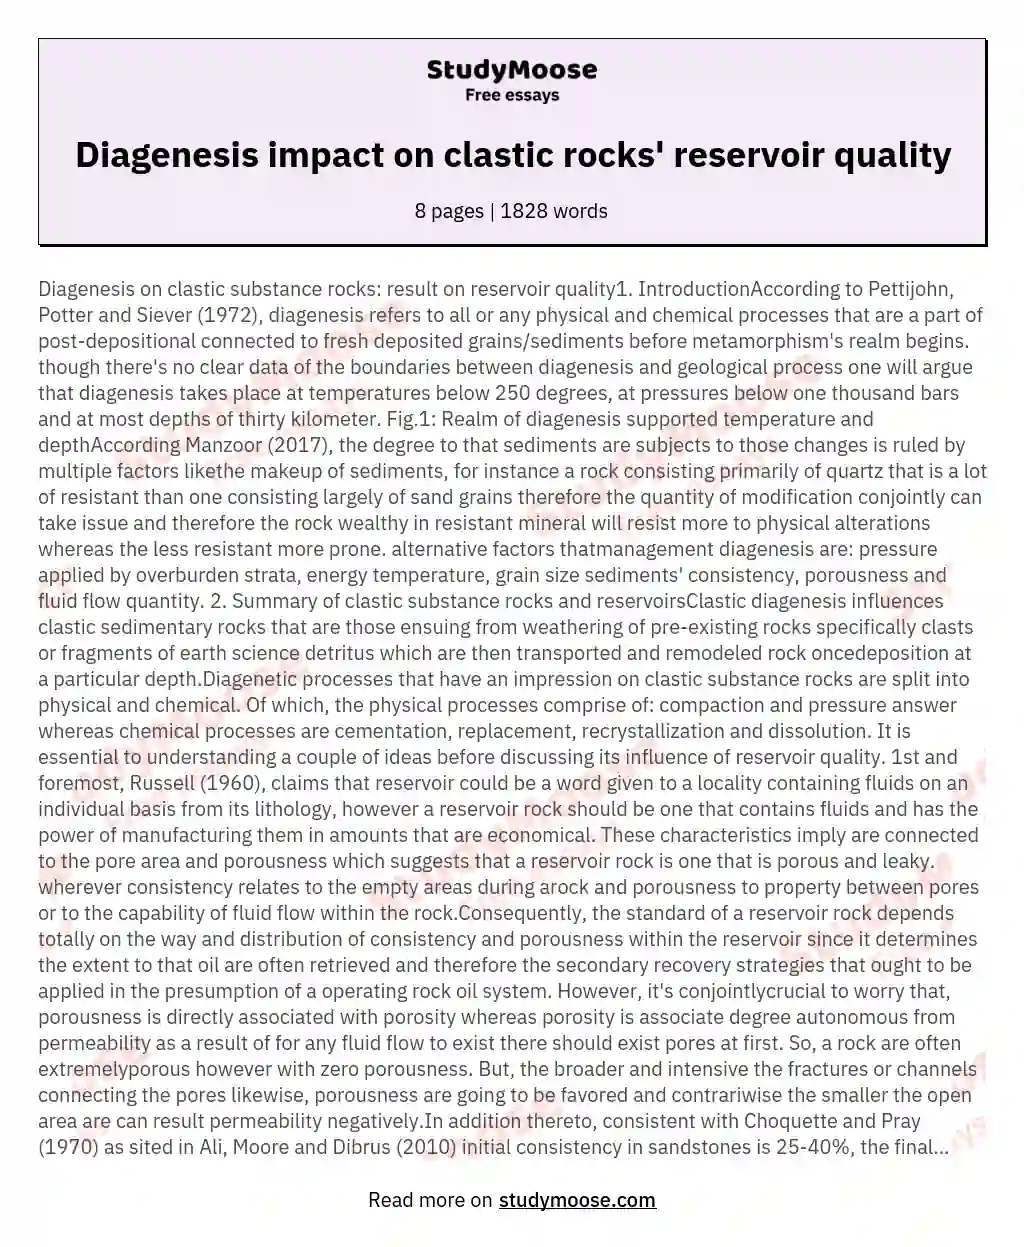 Diagenesis on clastic substance rocks result on reservoir quality1 IntroductionAccording to Pettijohn